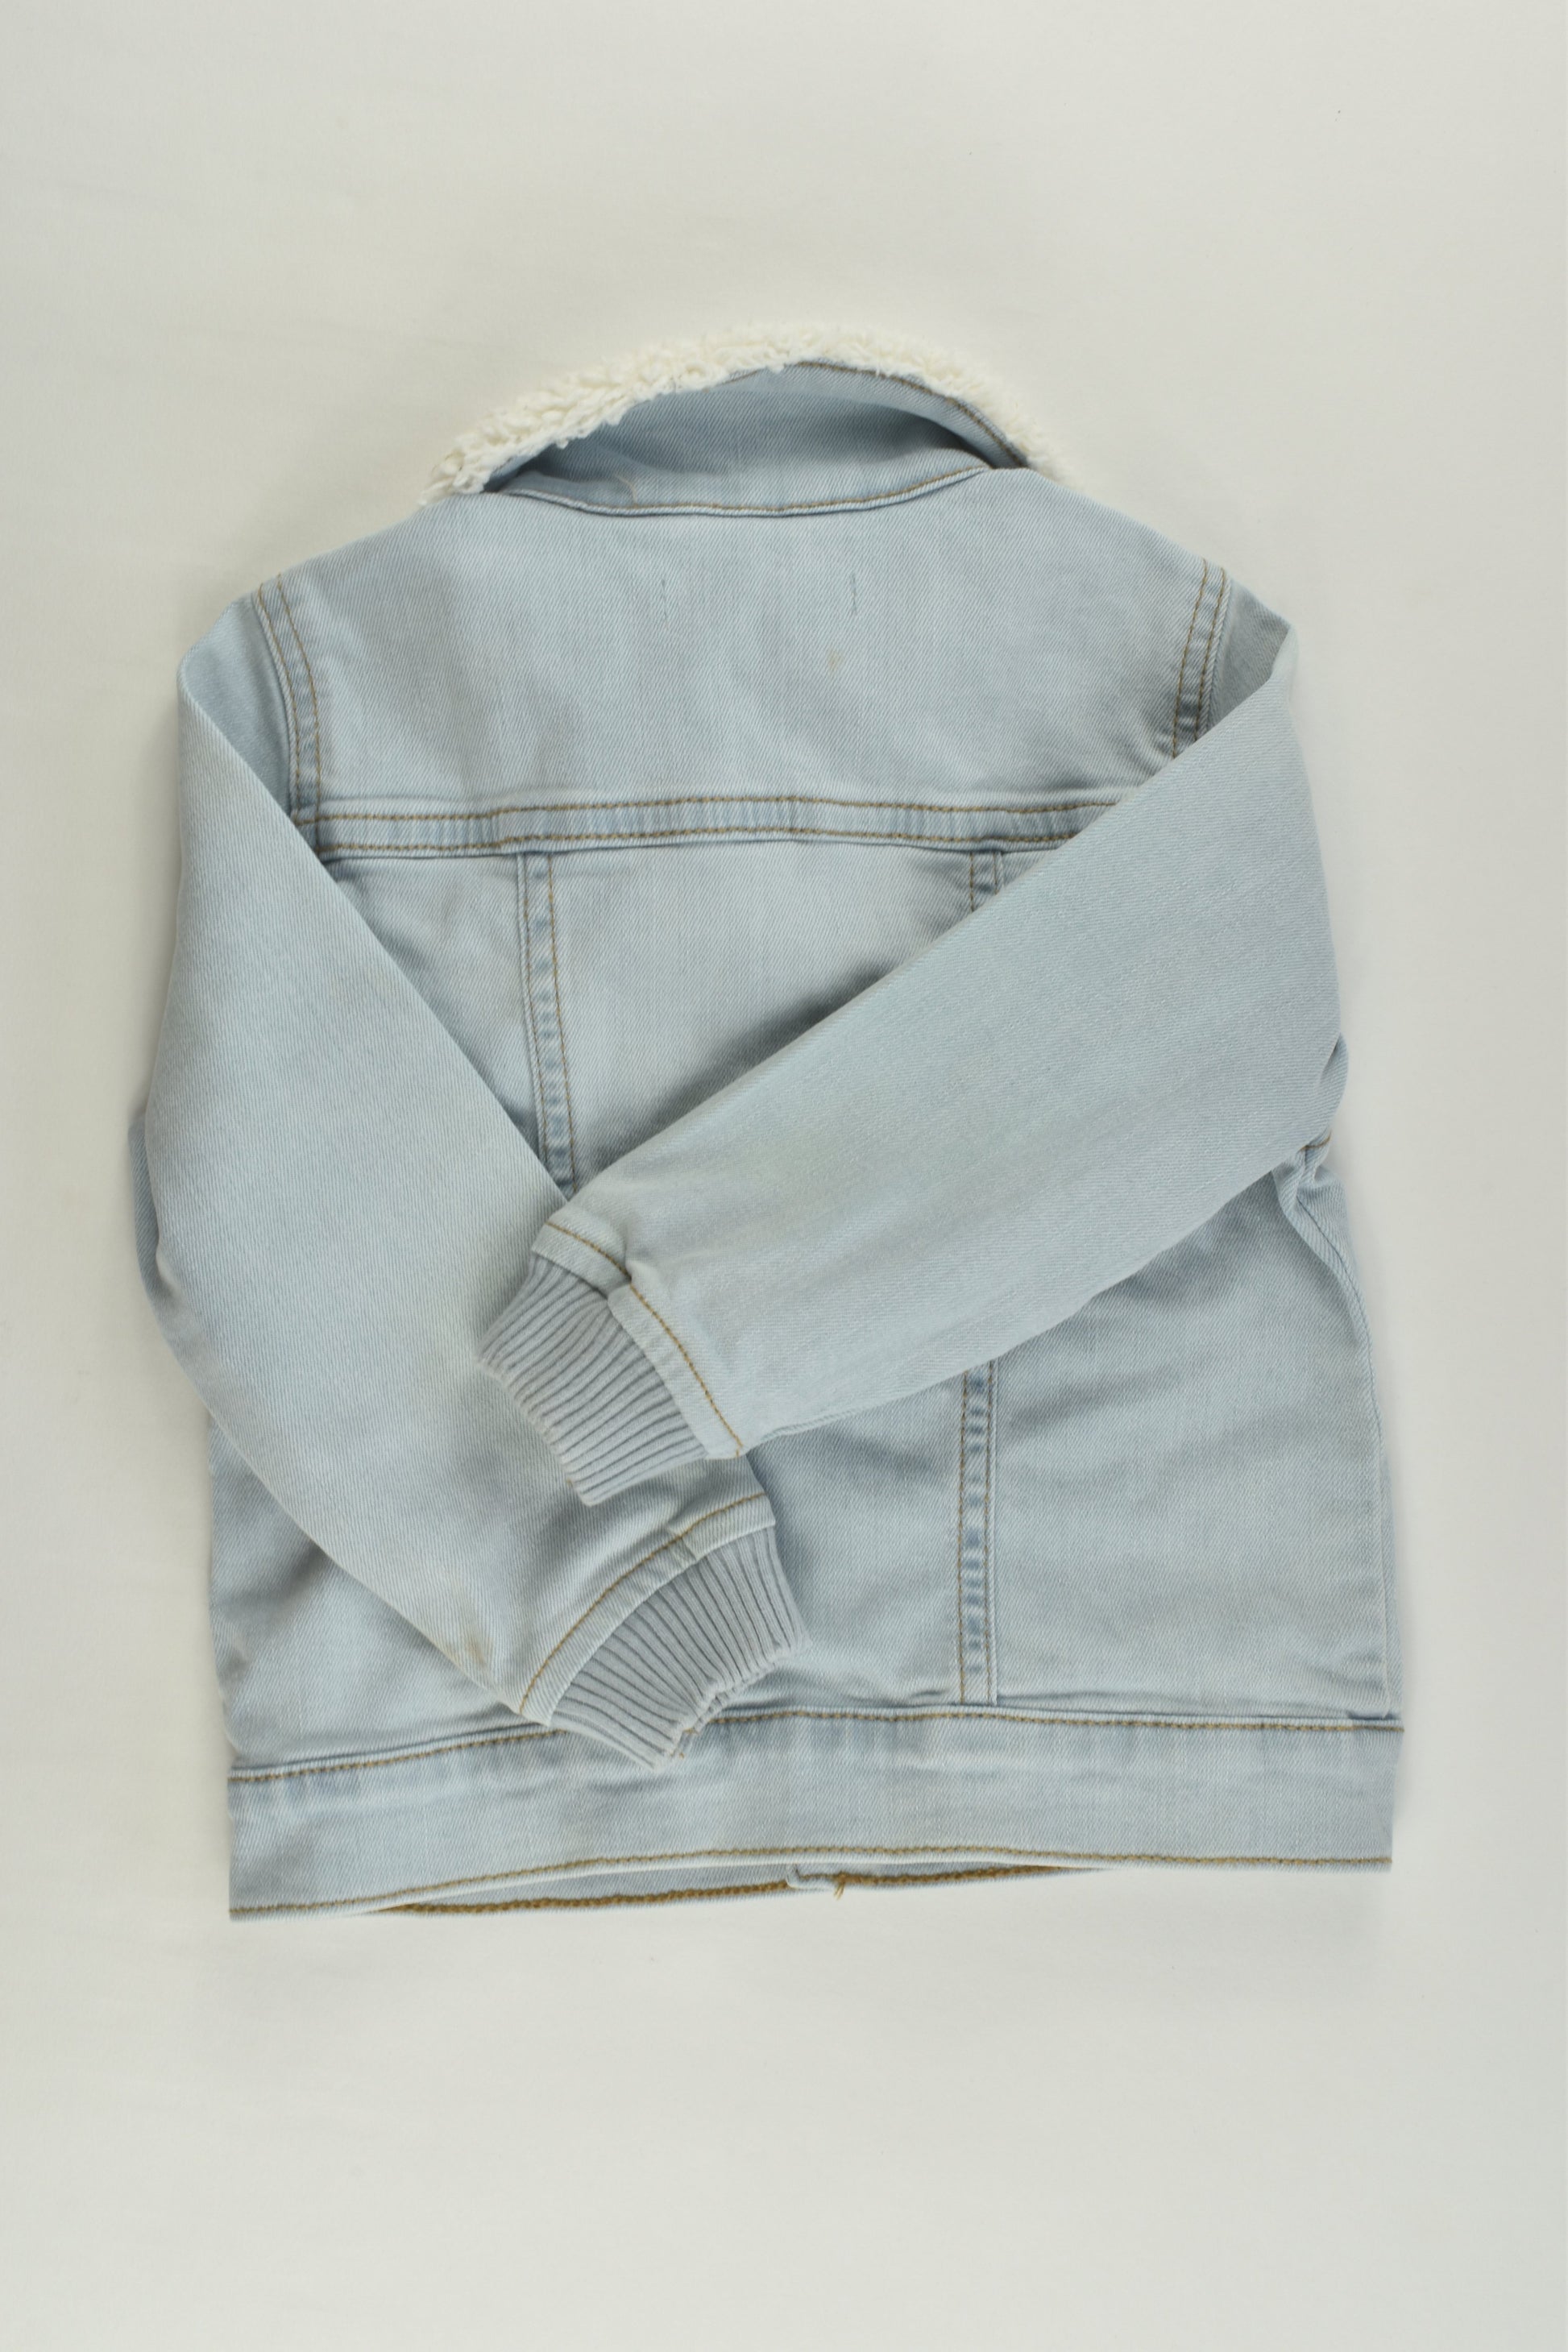 Target Size 2 Stretchy Denim Jacket with Sherpa Collar